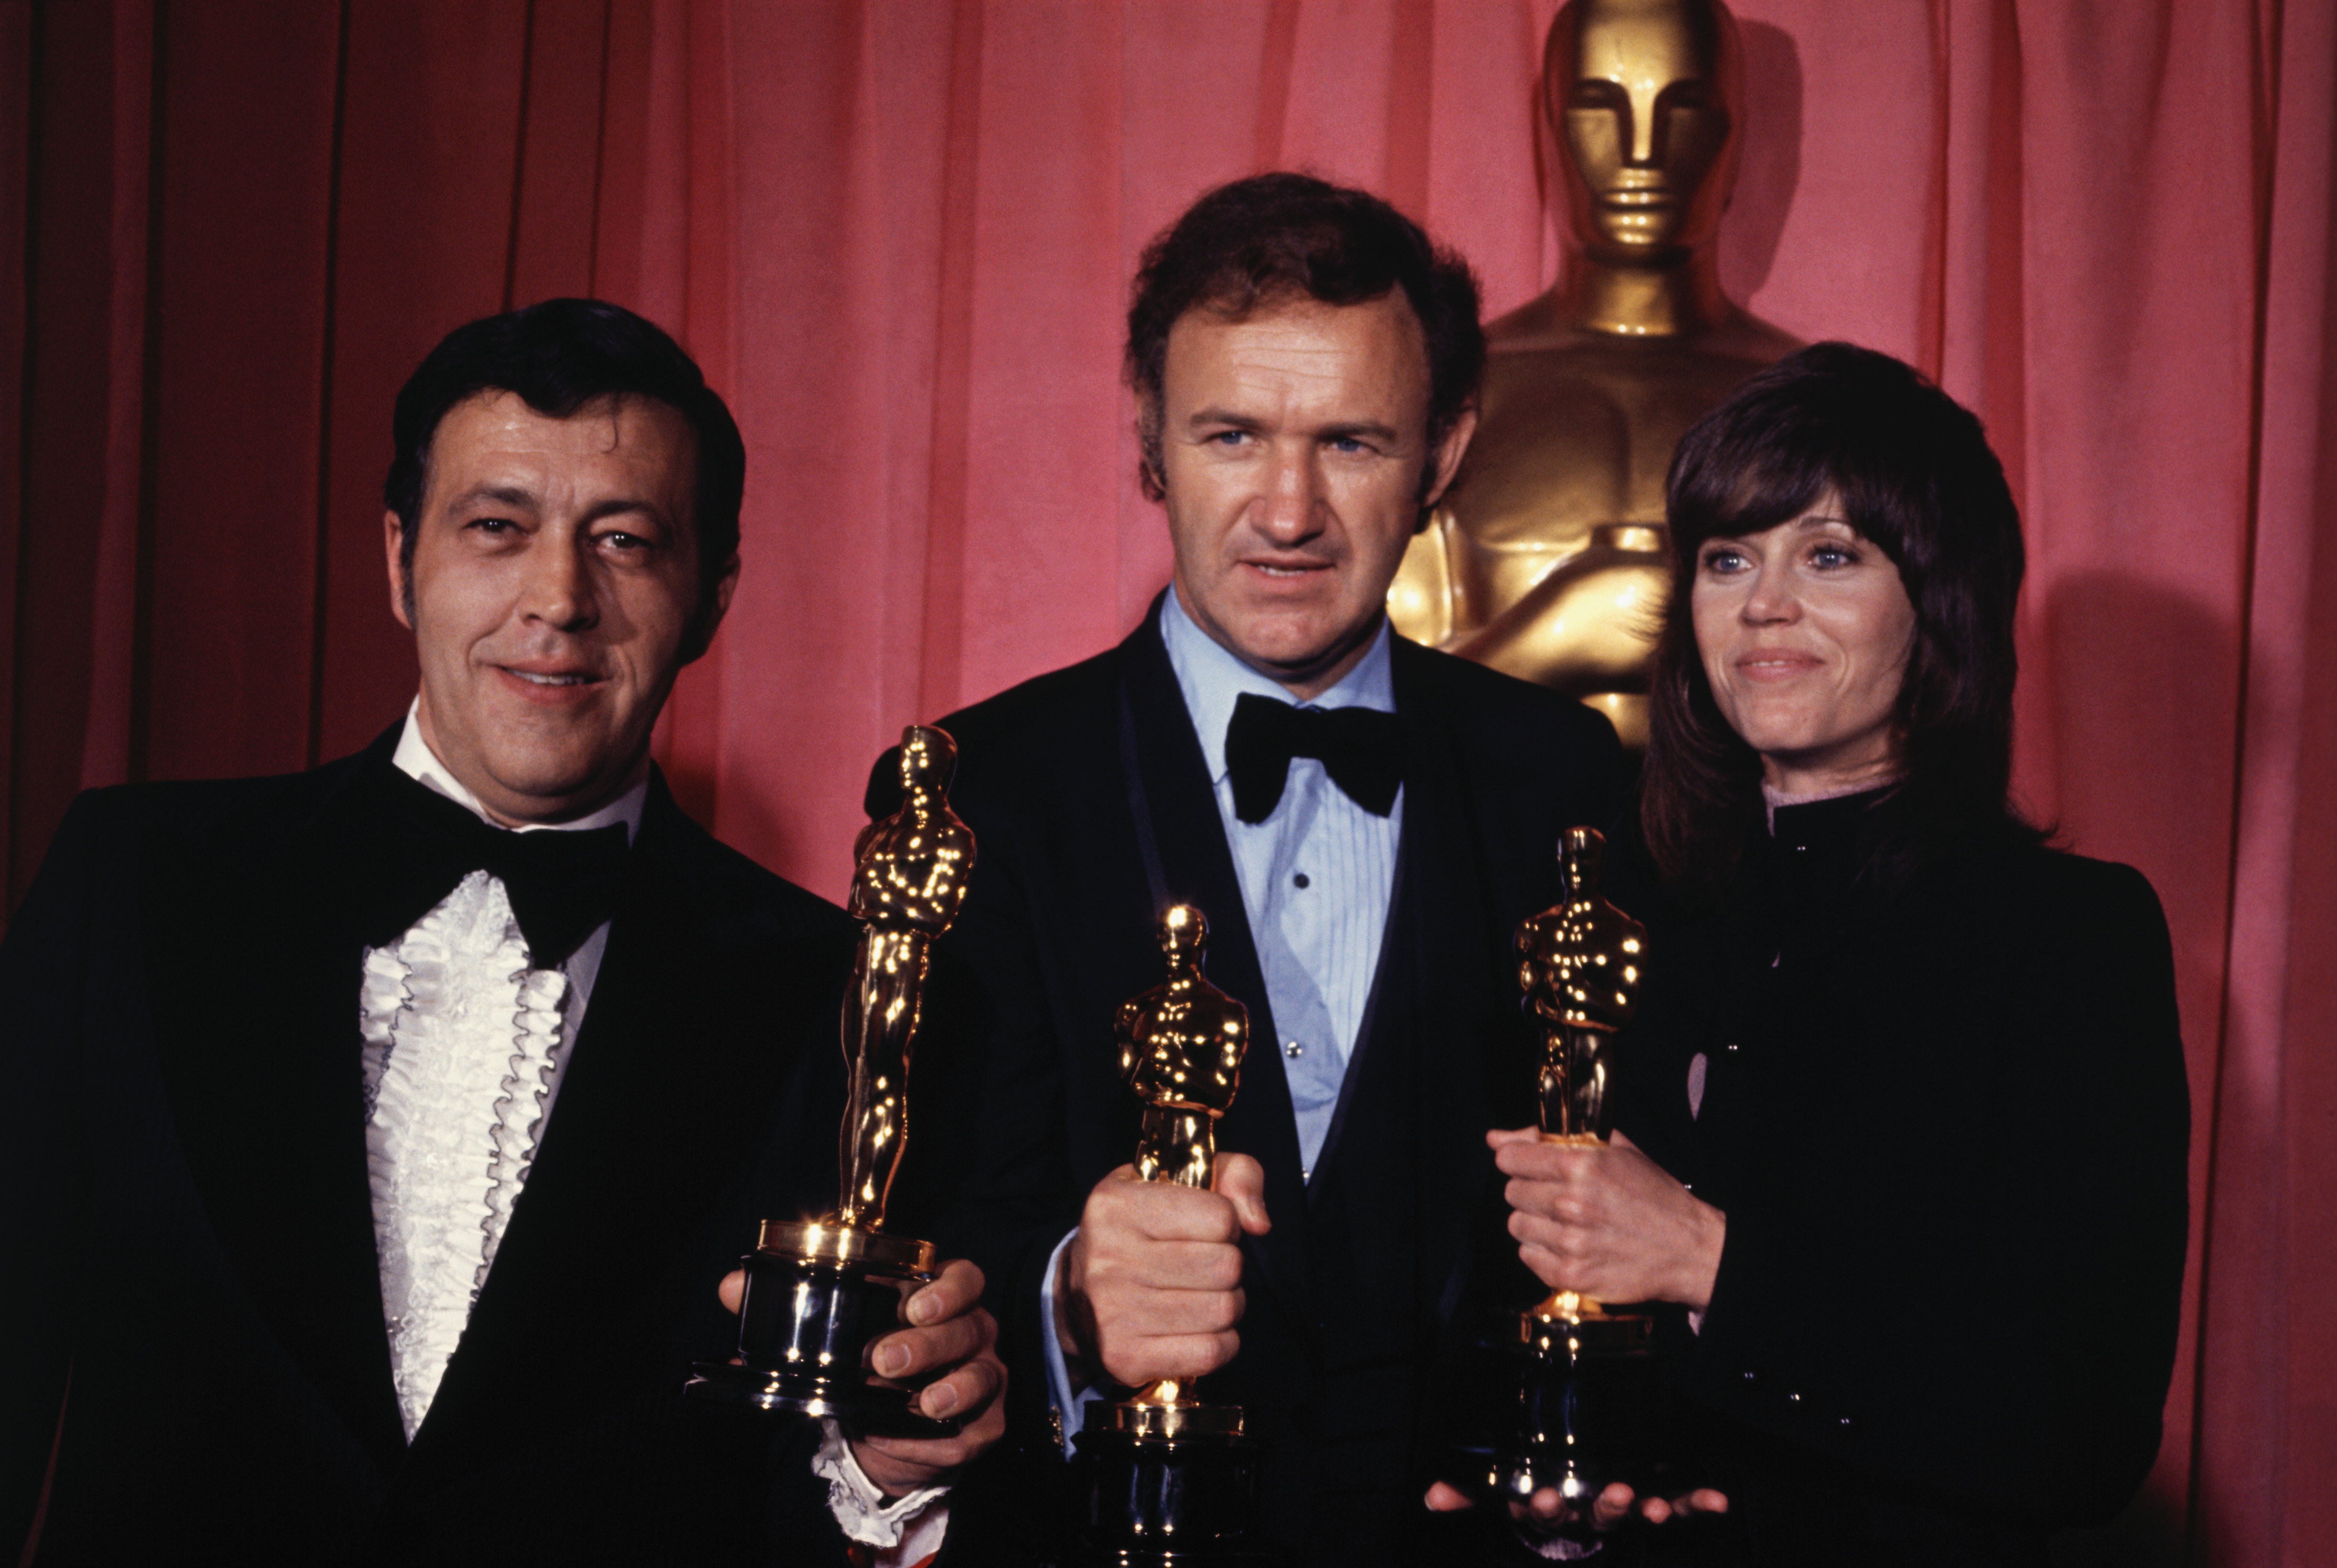 Philip D' Antoni, Gene Hackman and Jane Fonda at the 44th movie Academy Awards ceremony on April 10, 1972, in Los Angeles, California. | Source: Getty Images